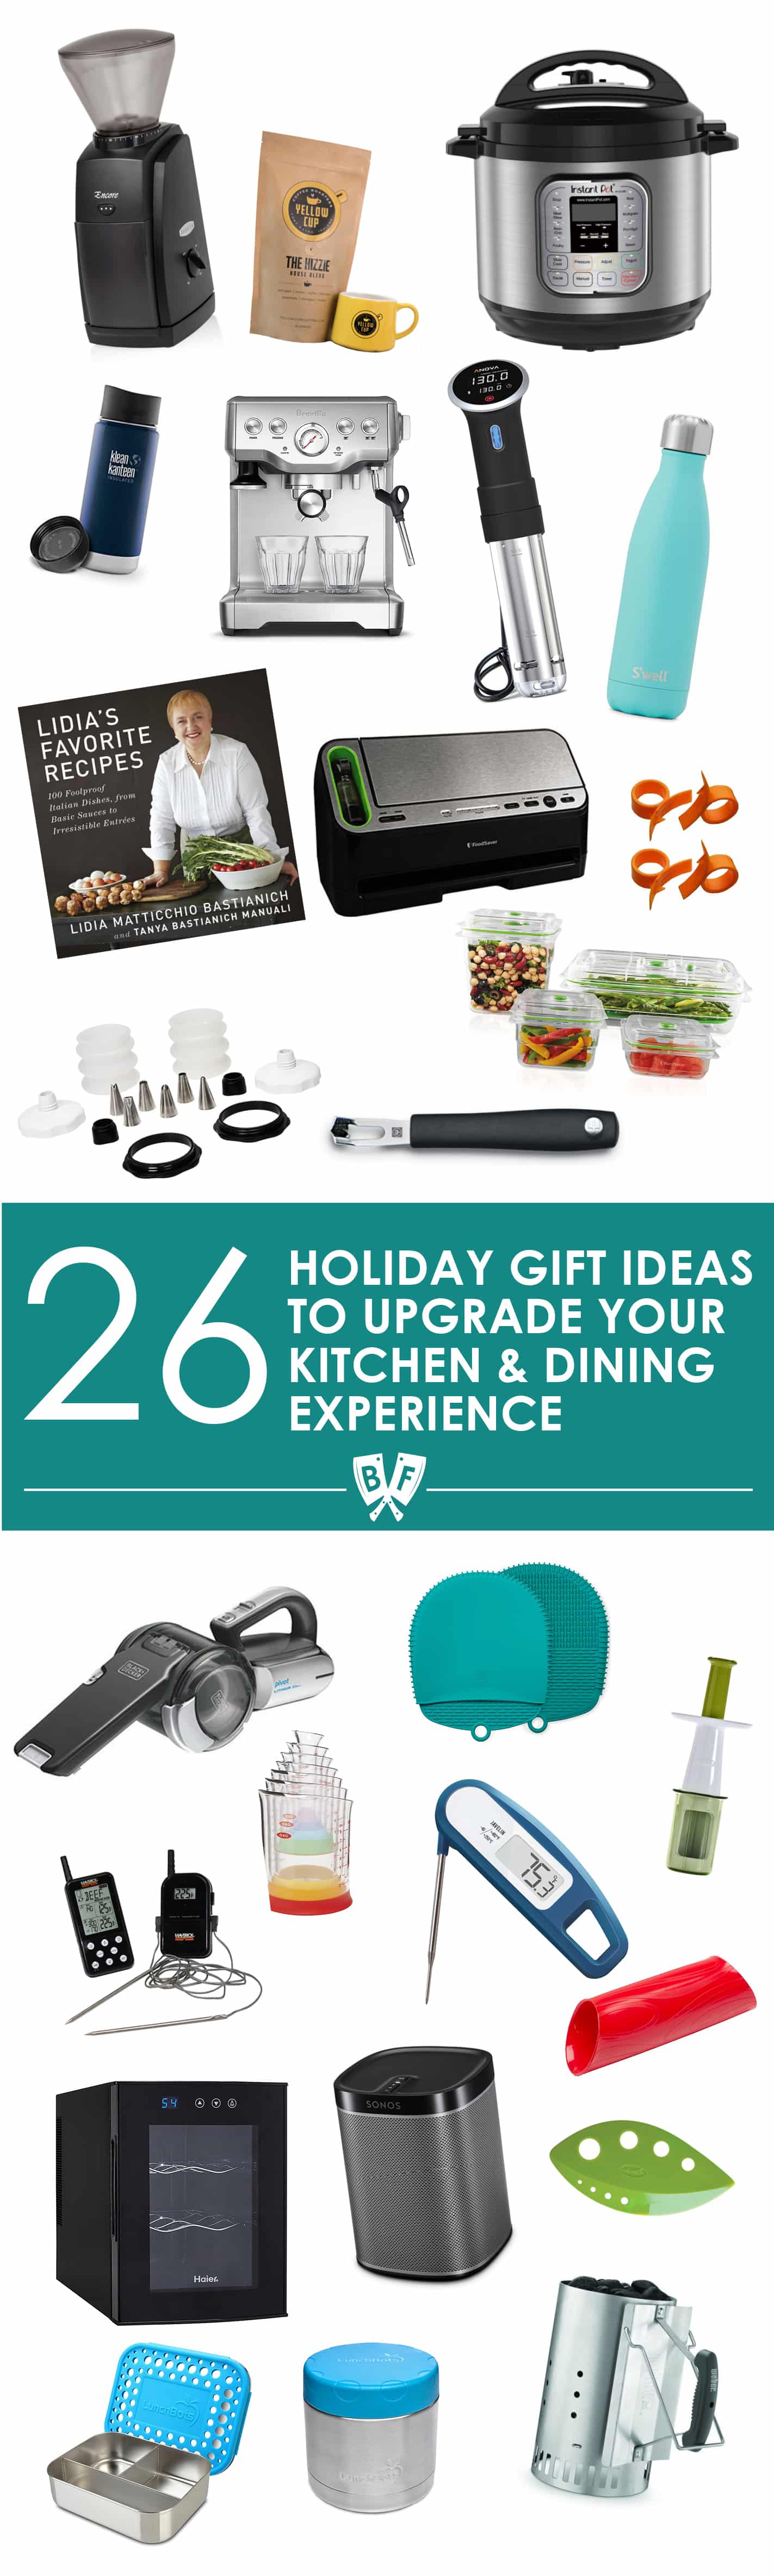 Holiday Gift Ideas to Upgrade Your Kitchen & Dining Experience: A list of holiday gift ideas + stocking stuffers for people who enjoy spending time cooking & entertaining. These 26 items will seriously rock your world!